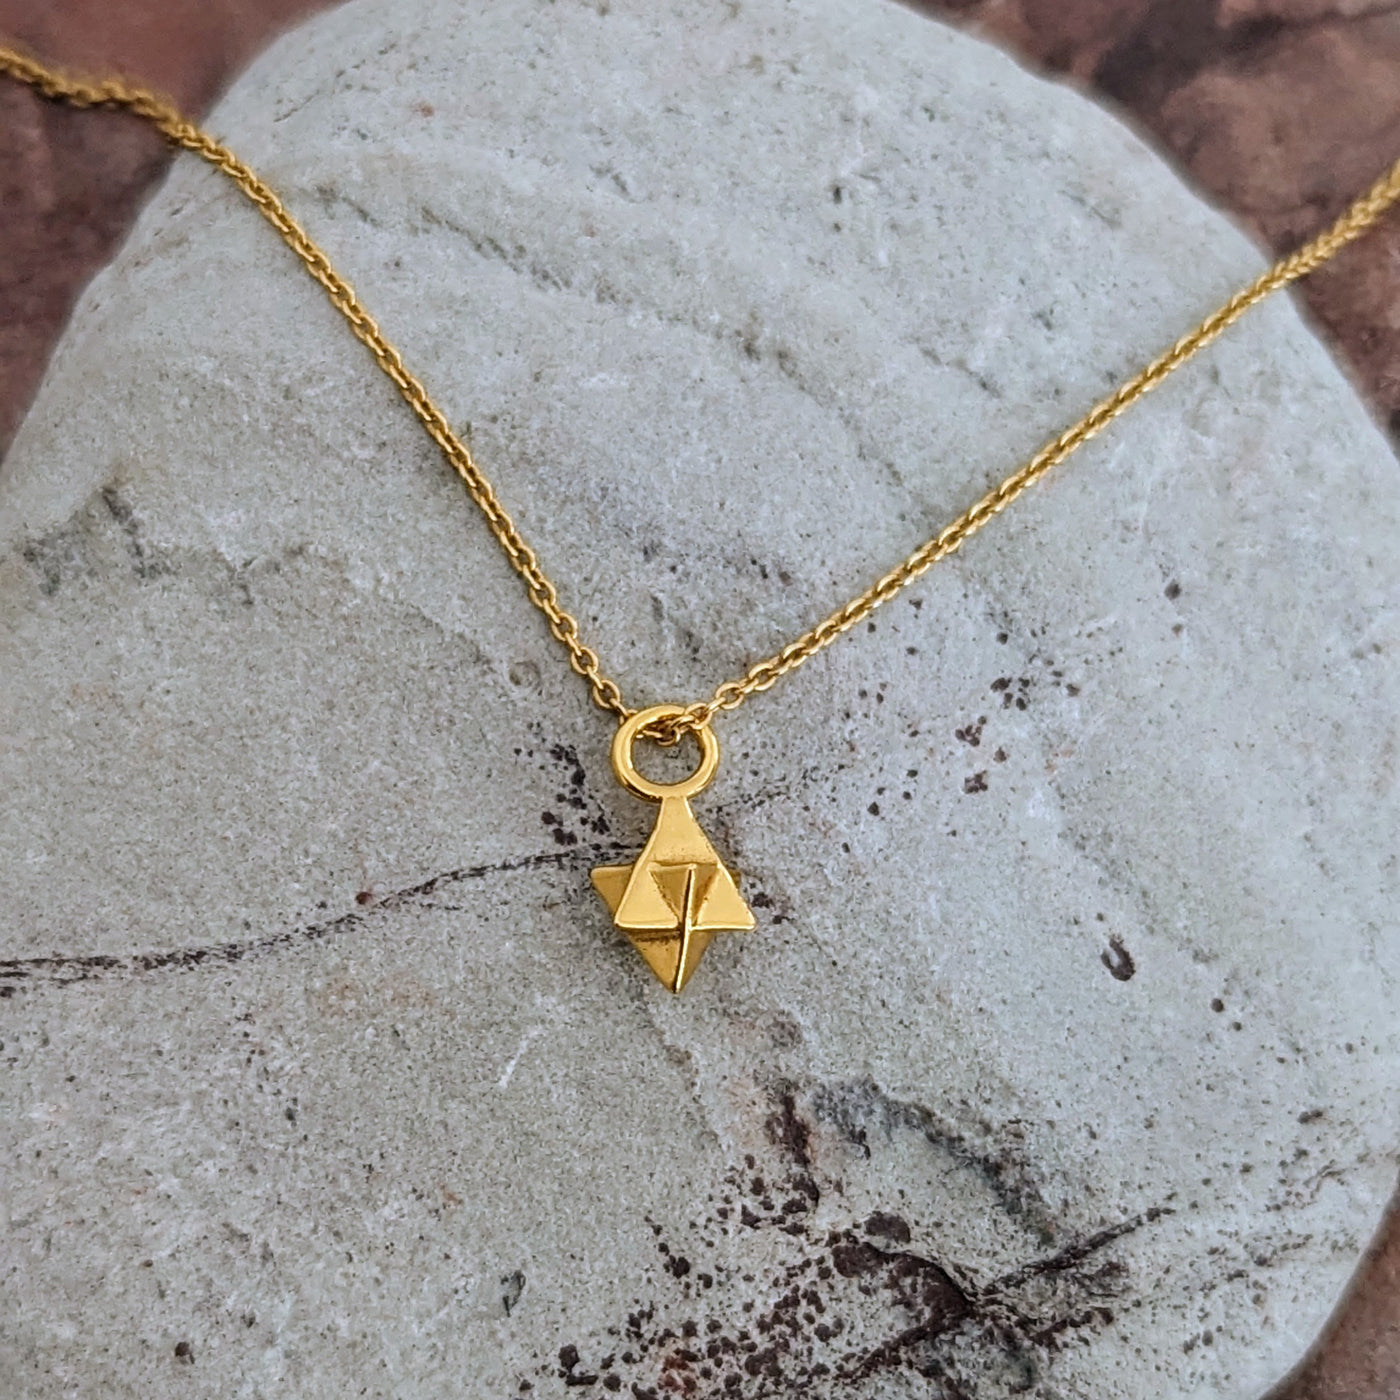 Gold plated tetrahedron necklace